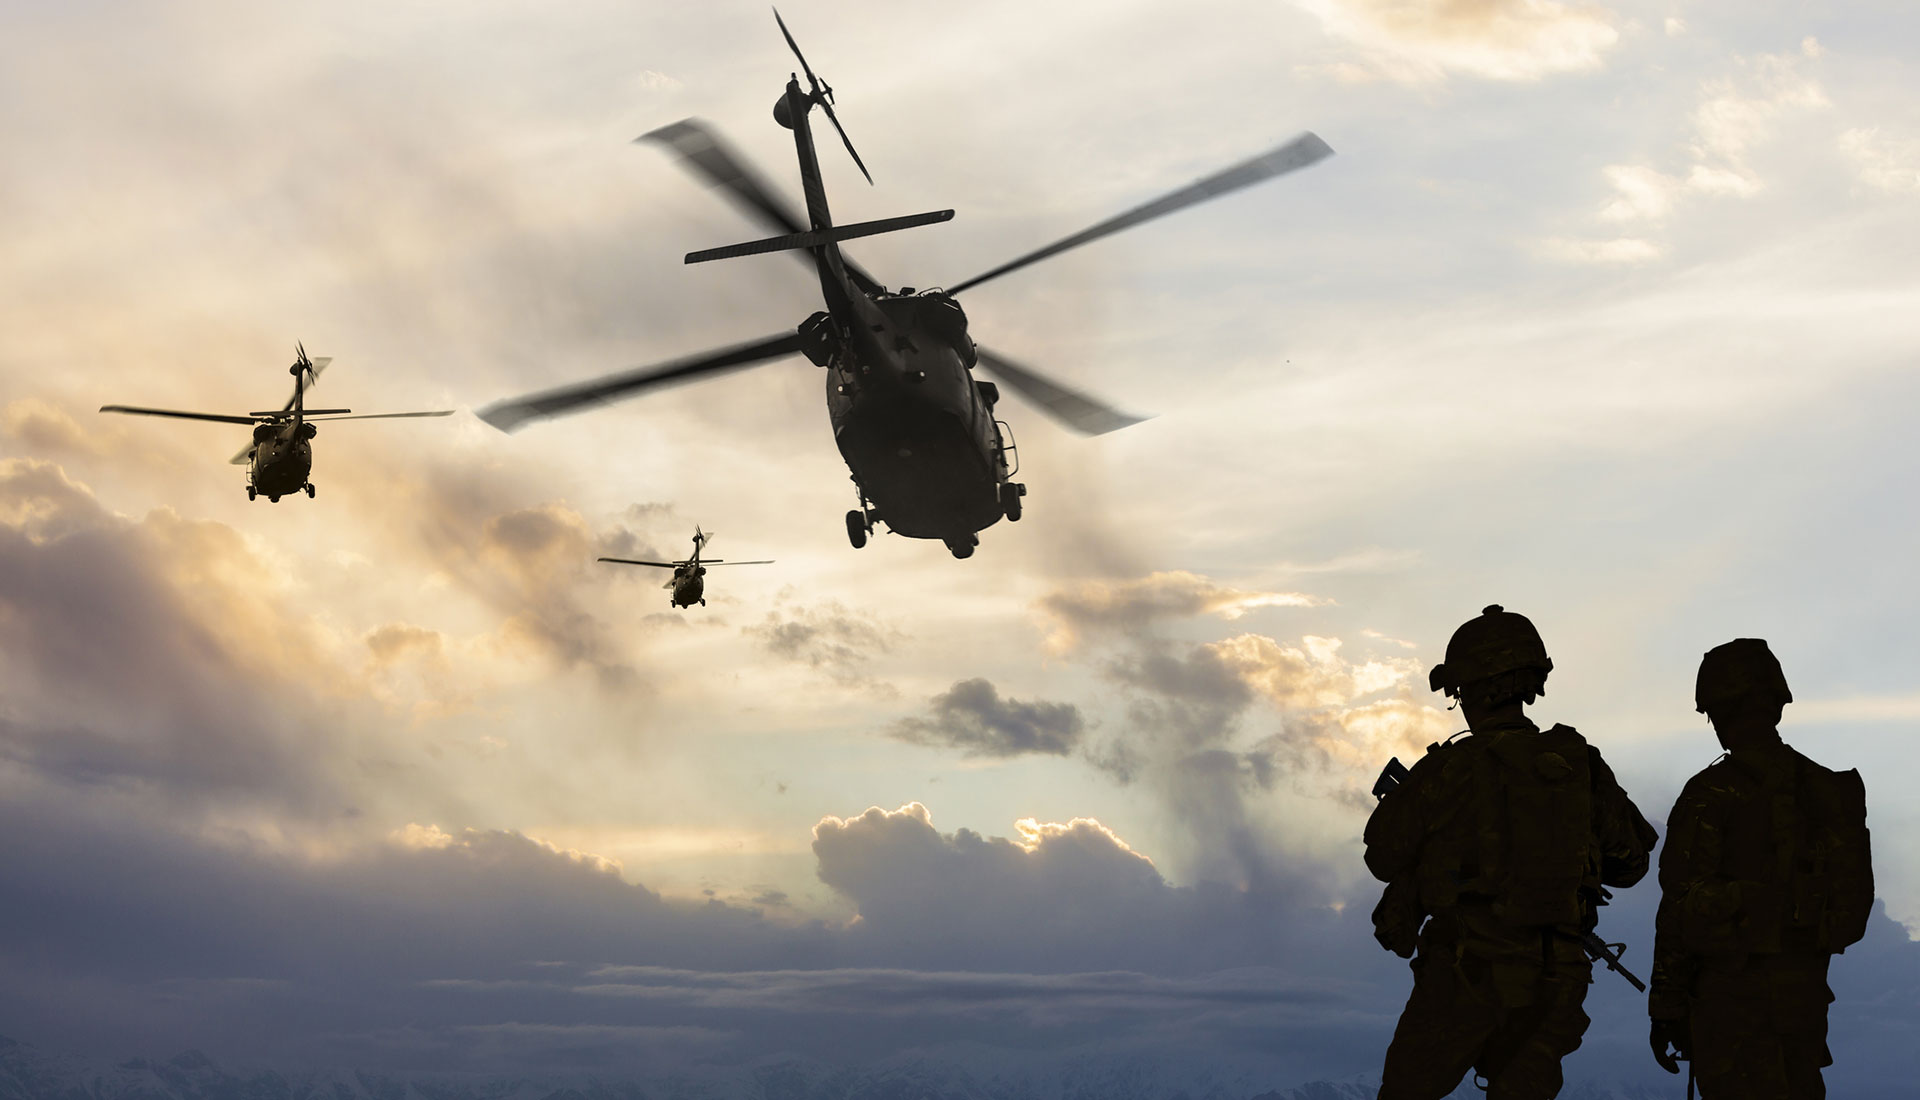 soldiers and helicopters in silhouette showing soldiers going to complete a mission planned and developed by AI software technolgy